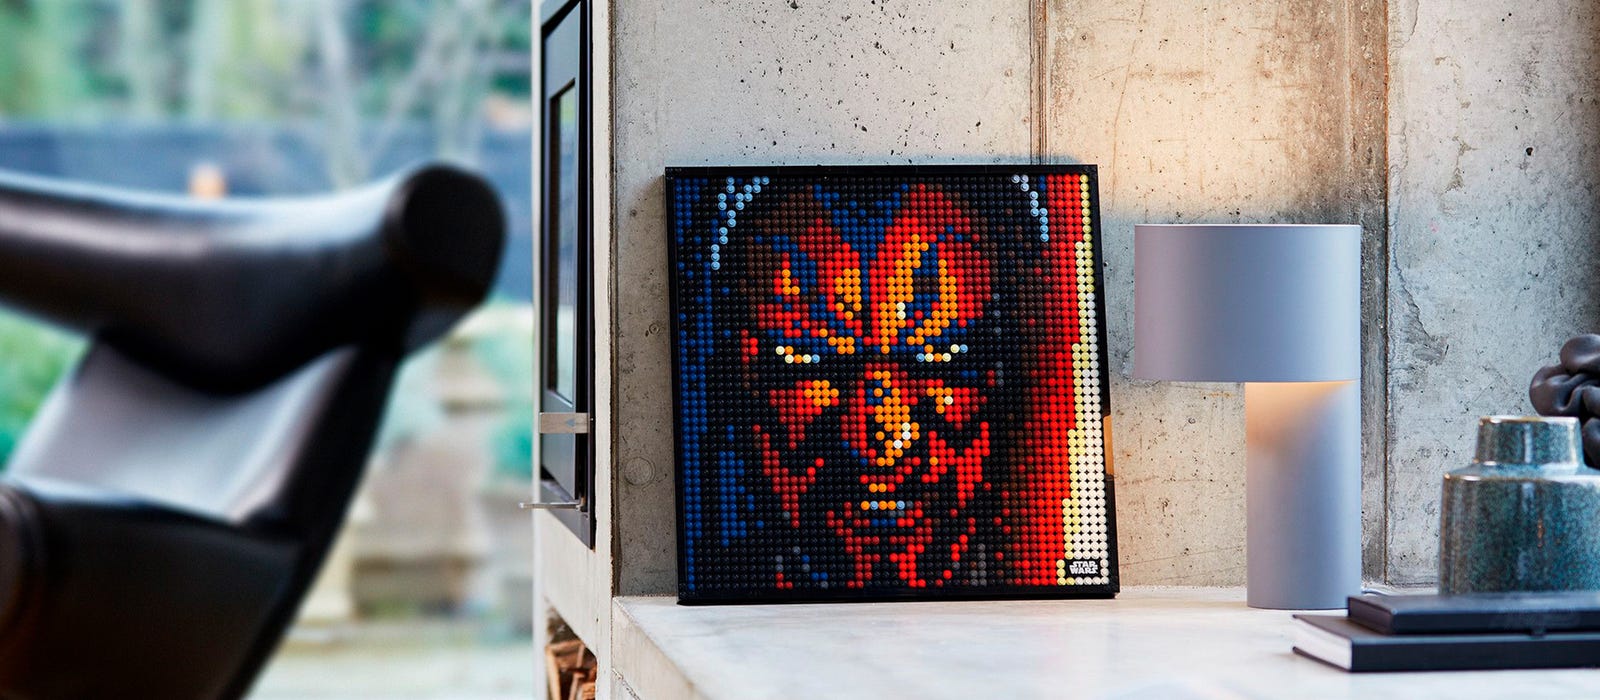 New LEGO Art Turns to the Dark Side